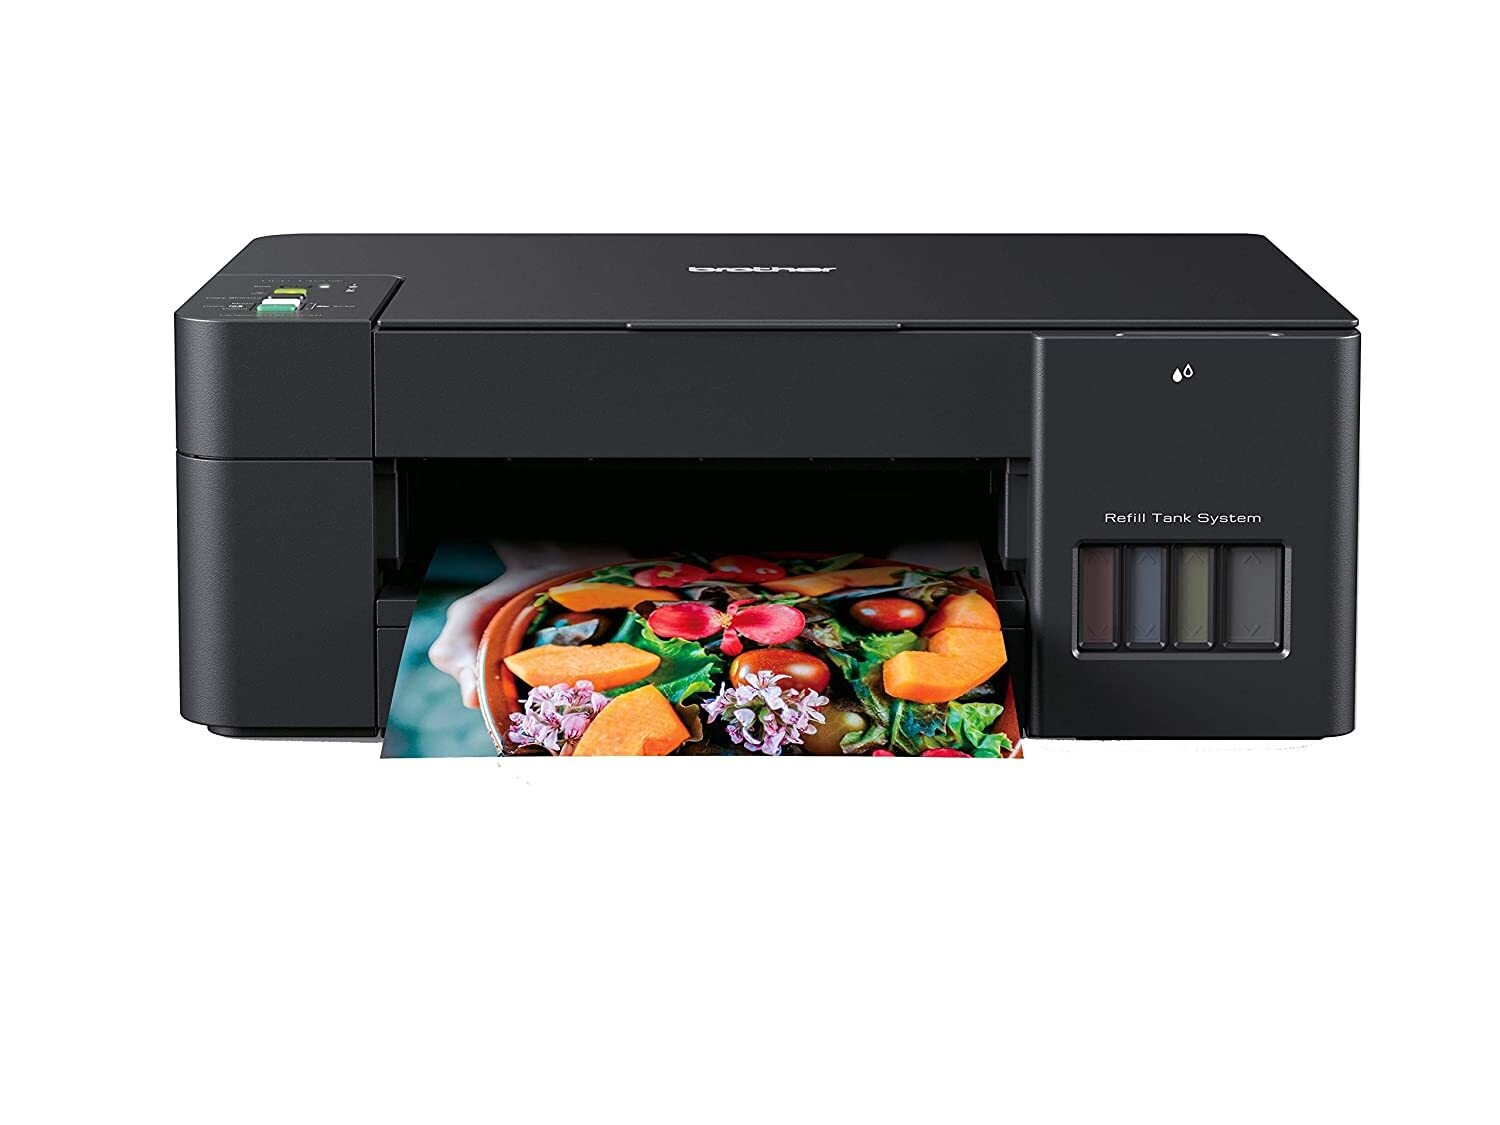 Brother DCP-T420W All-in One Ink Tank Refill System Printer